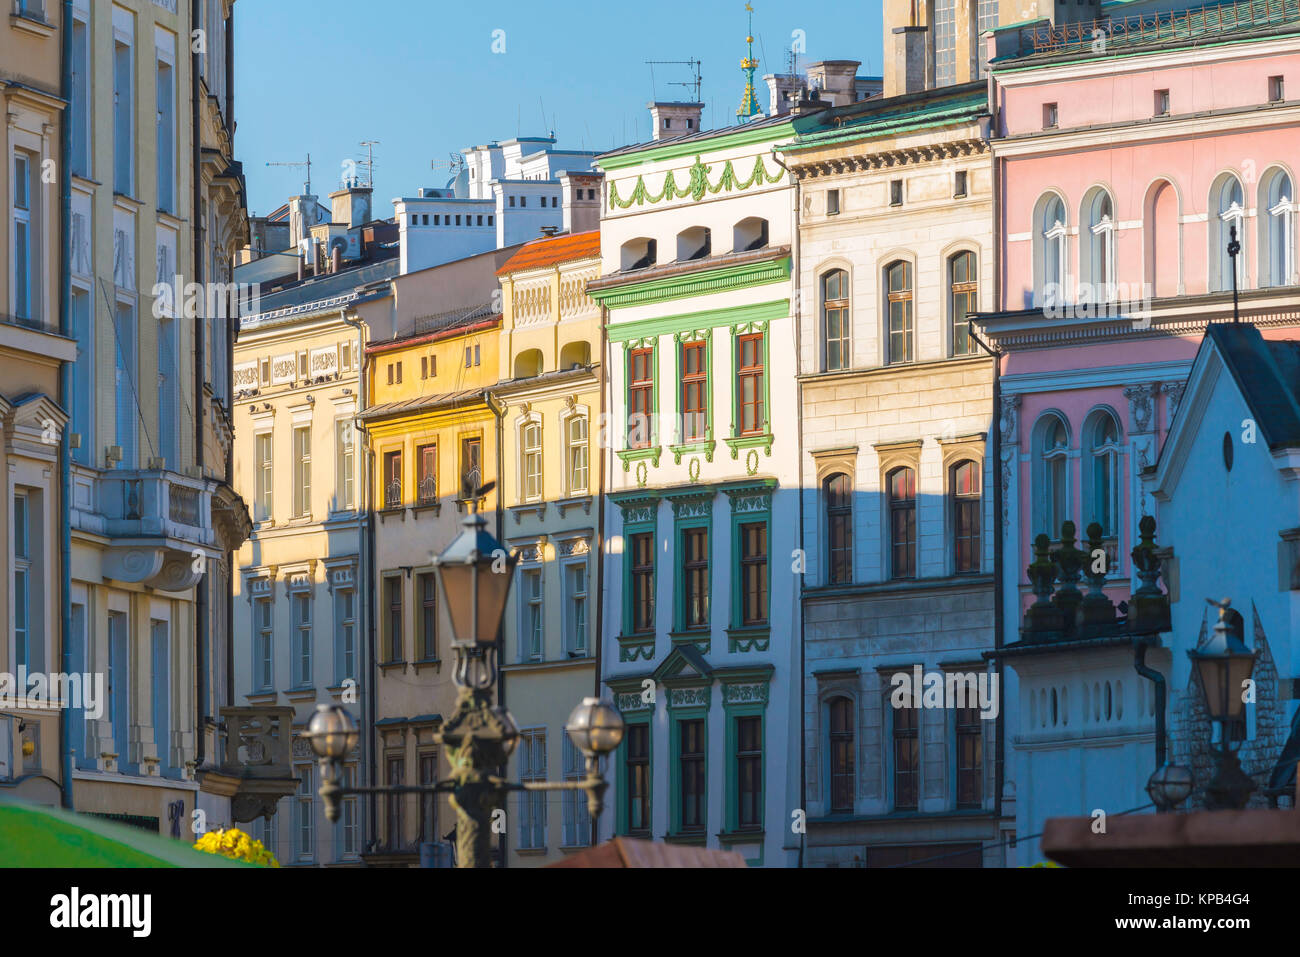 Poland baroque architecture, a colourful row of Baroque and Rococo buildings in the centre of Krakow, Poland. Stock Photo